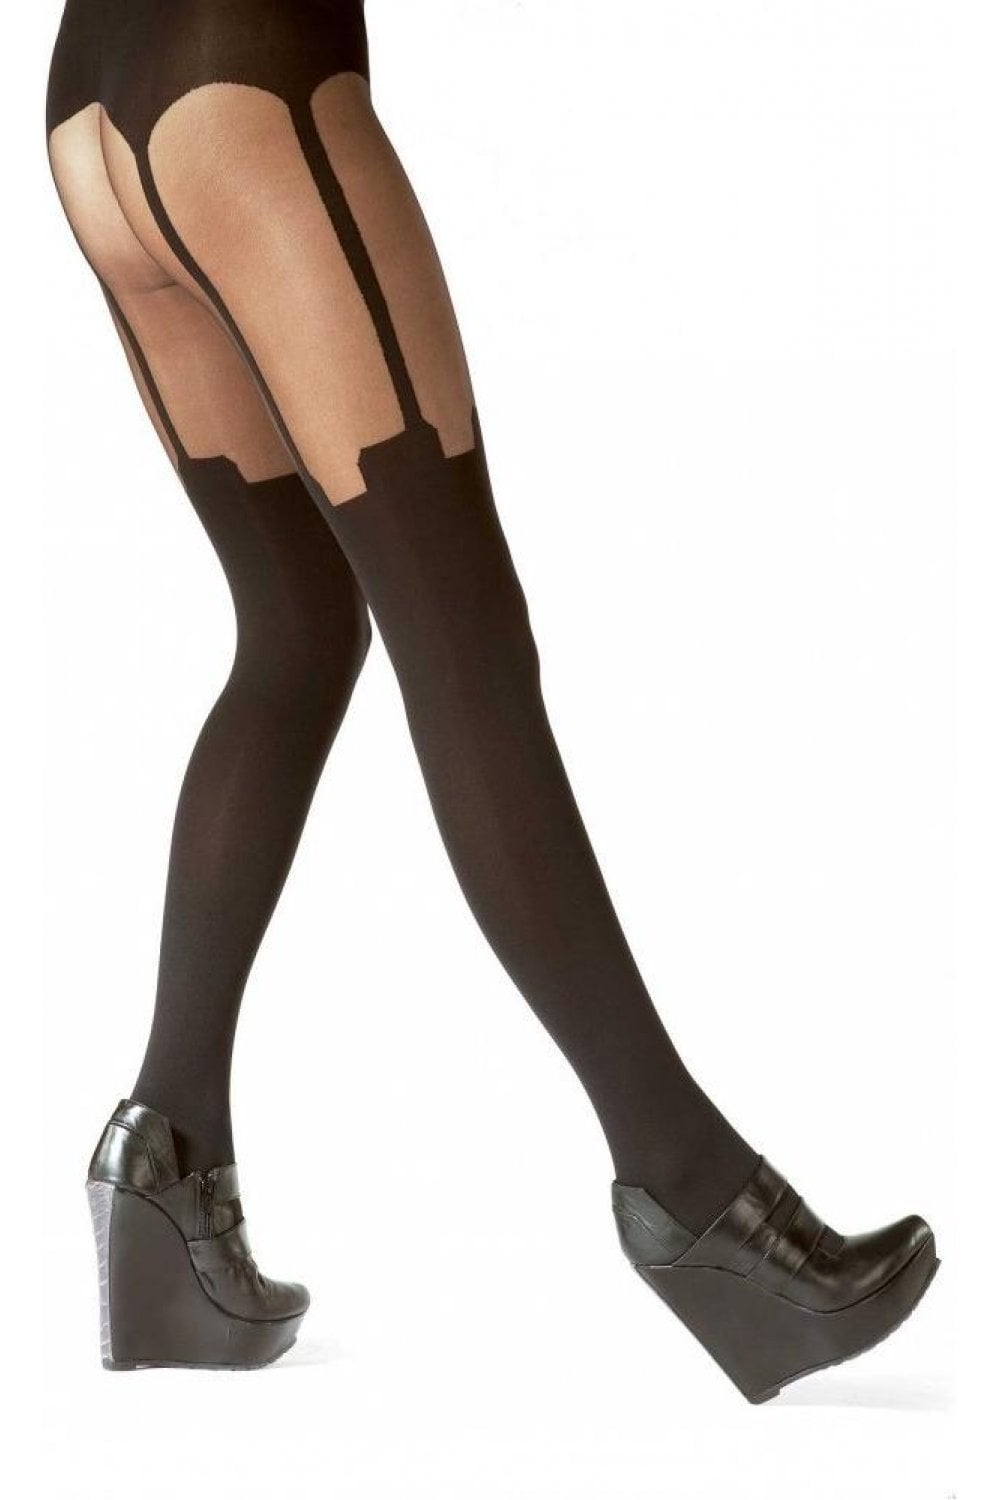 best of Seamed pantyhose Zigzag